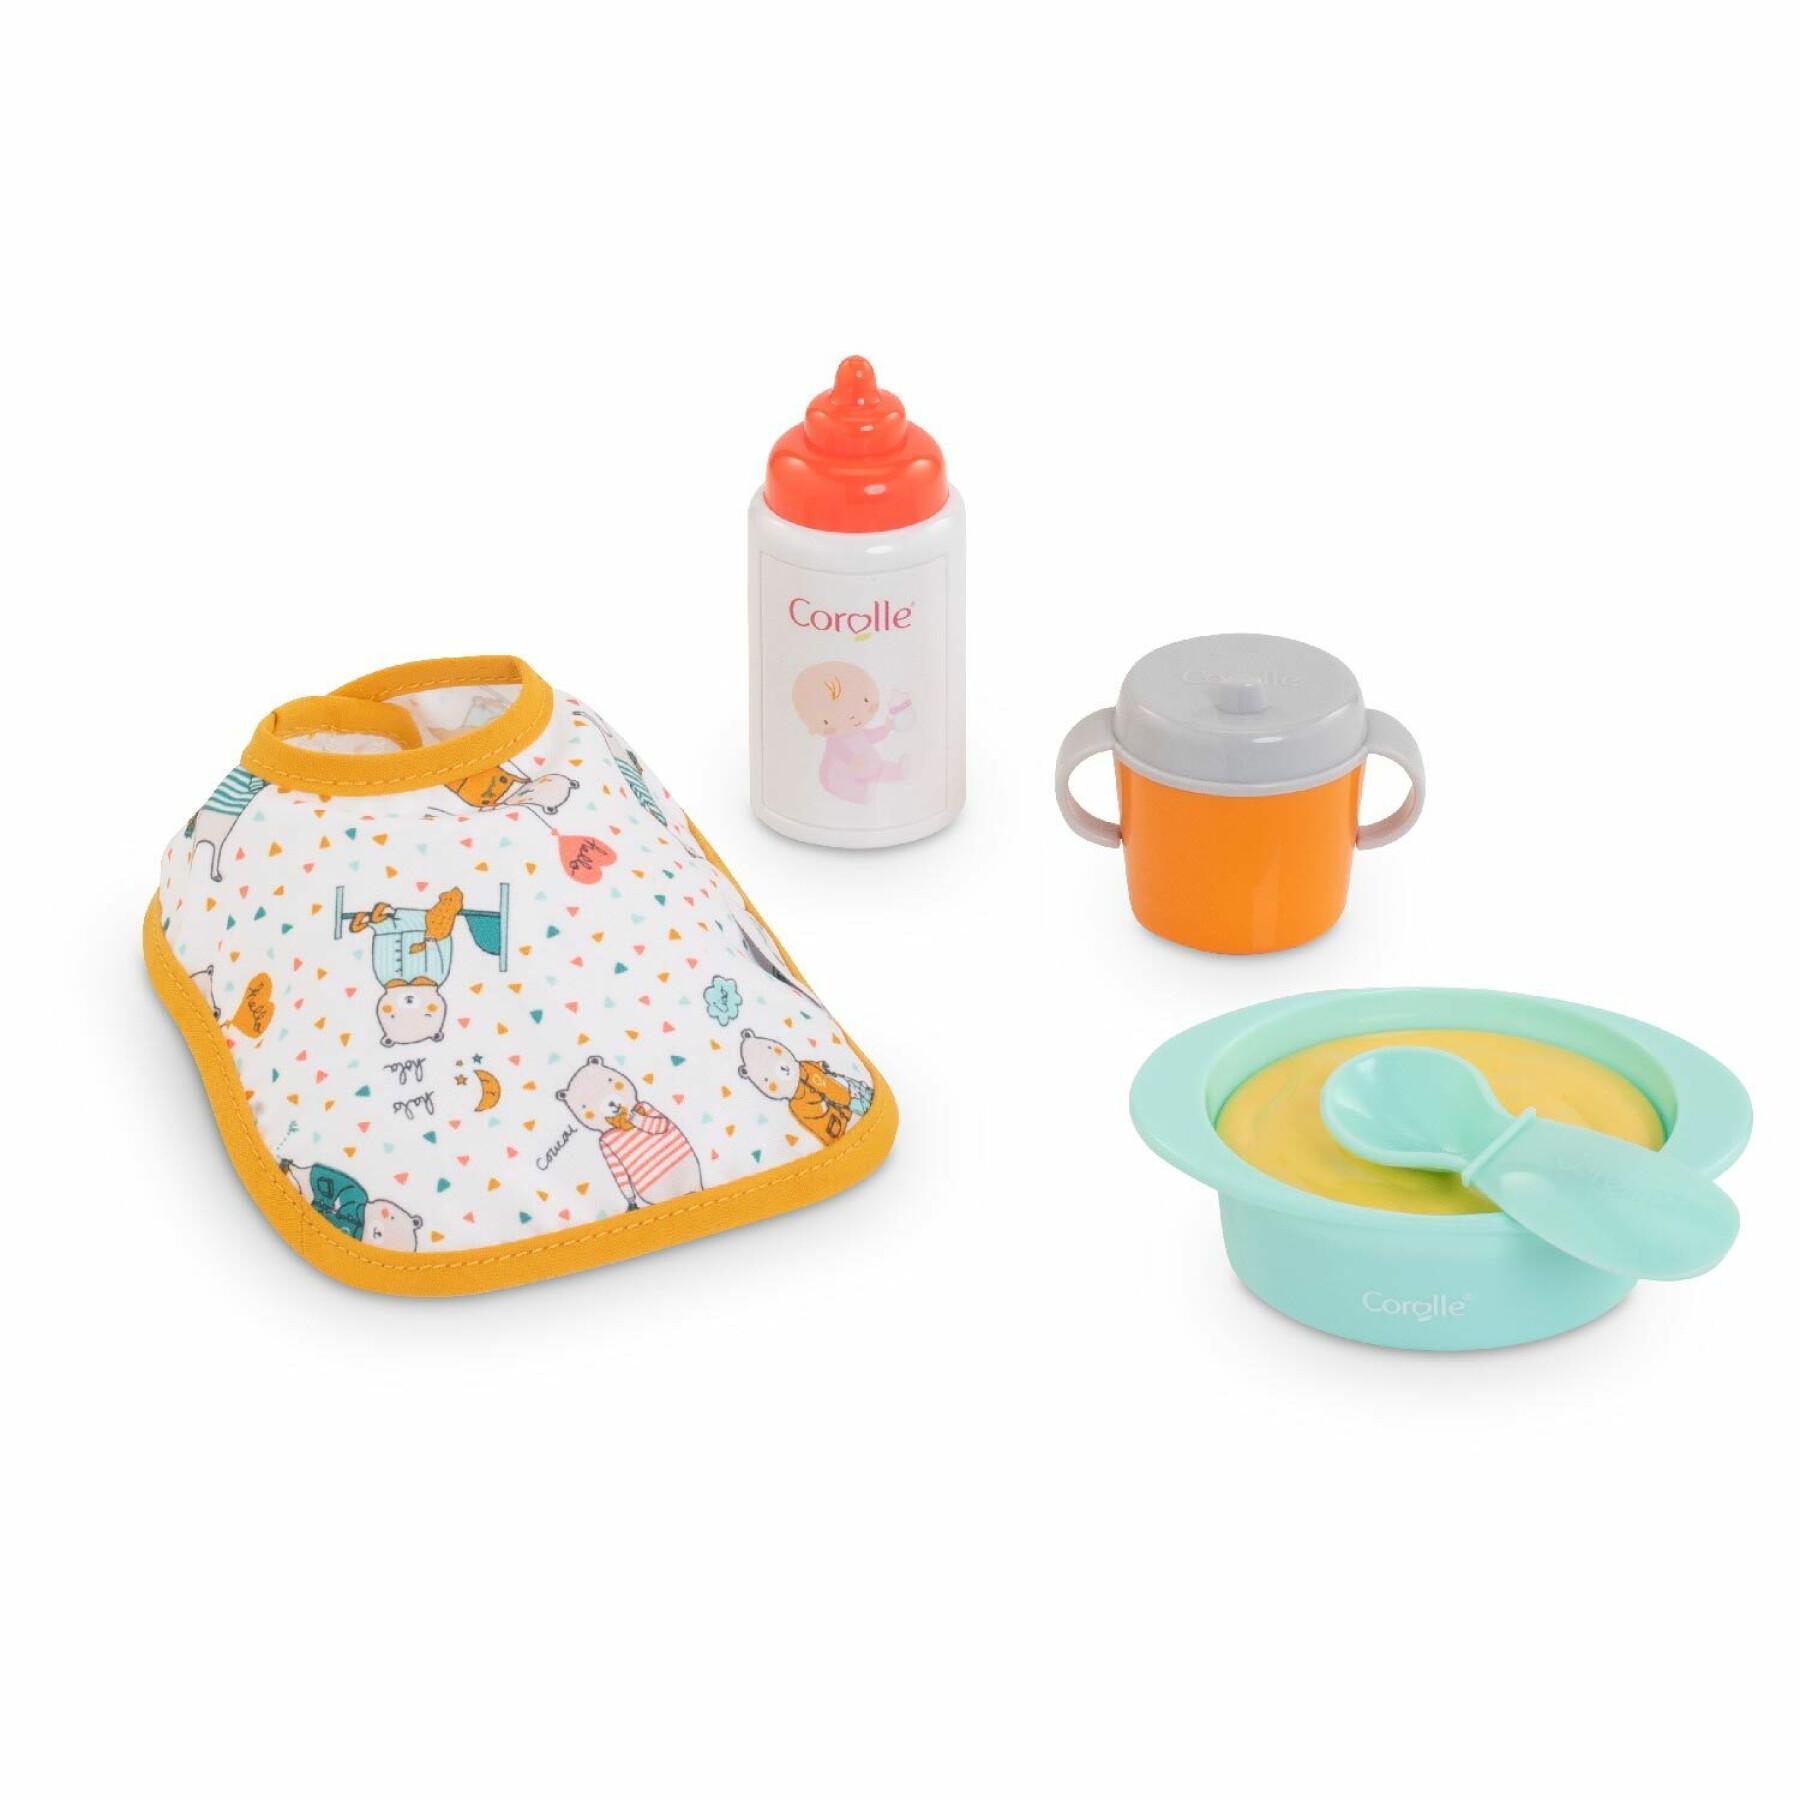 Small meal box for baby Corolle